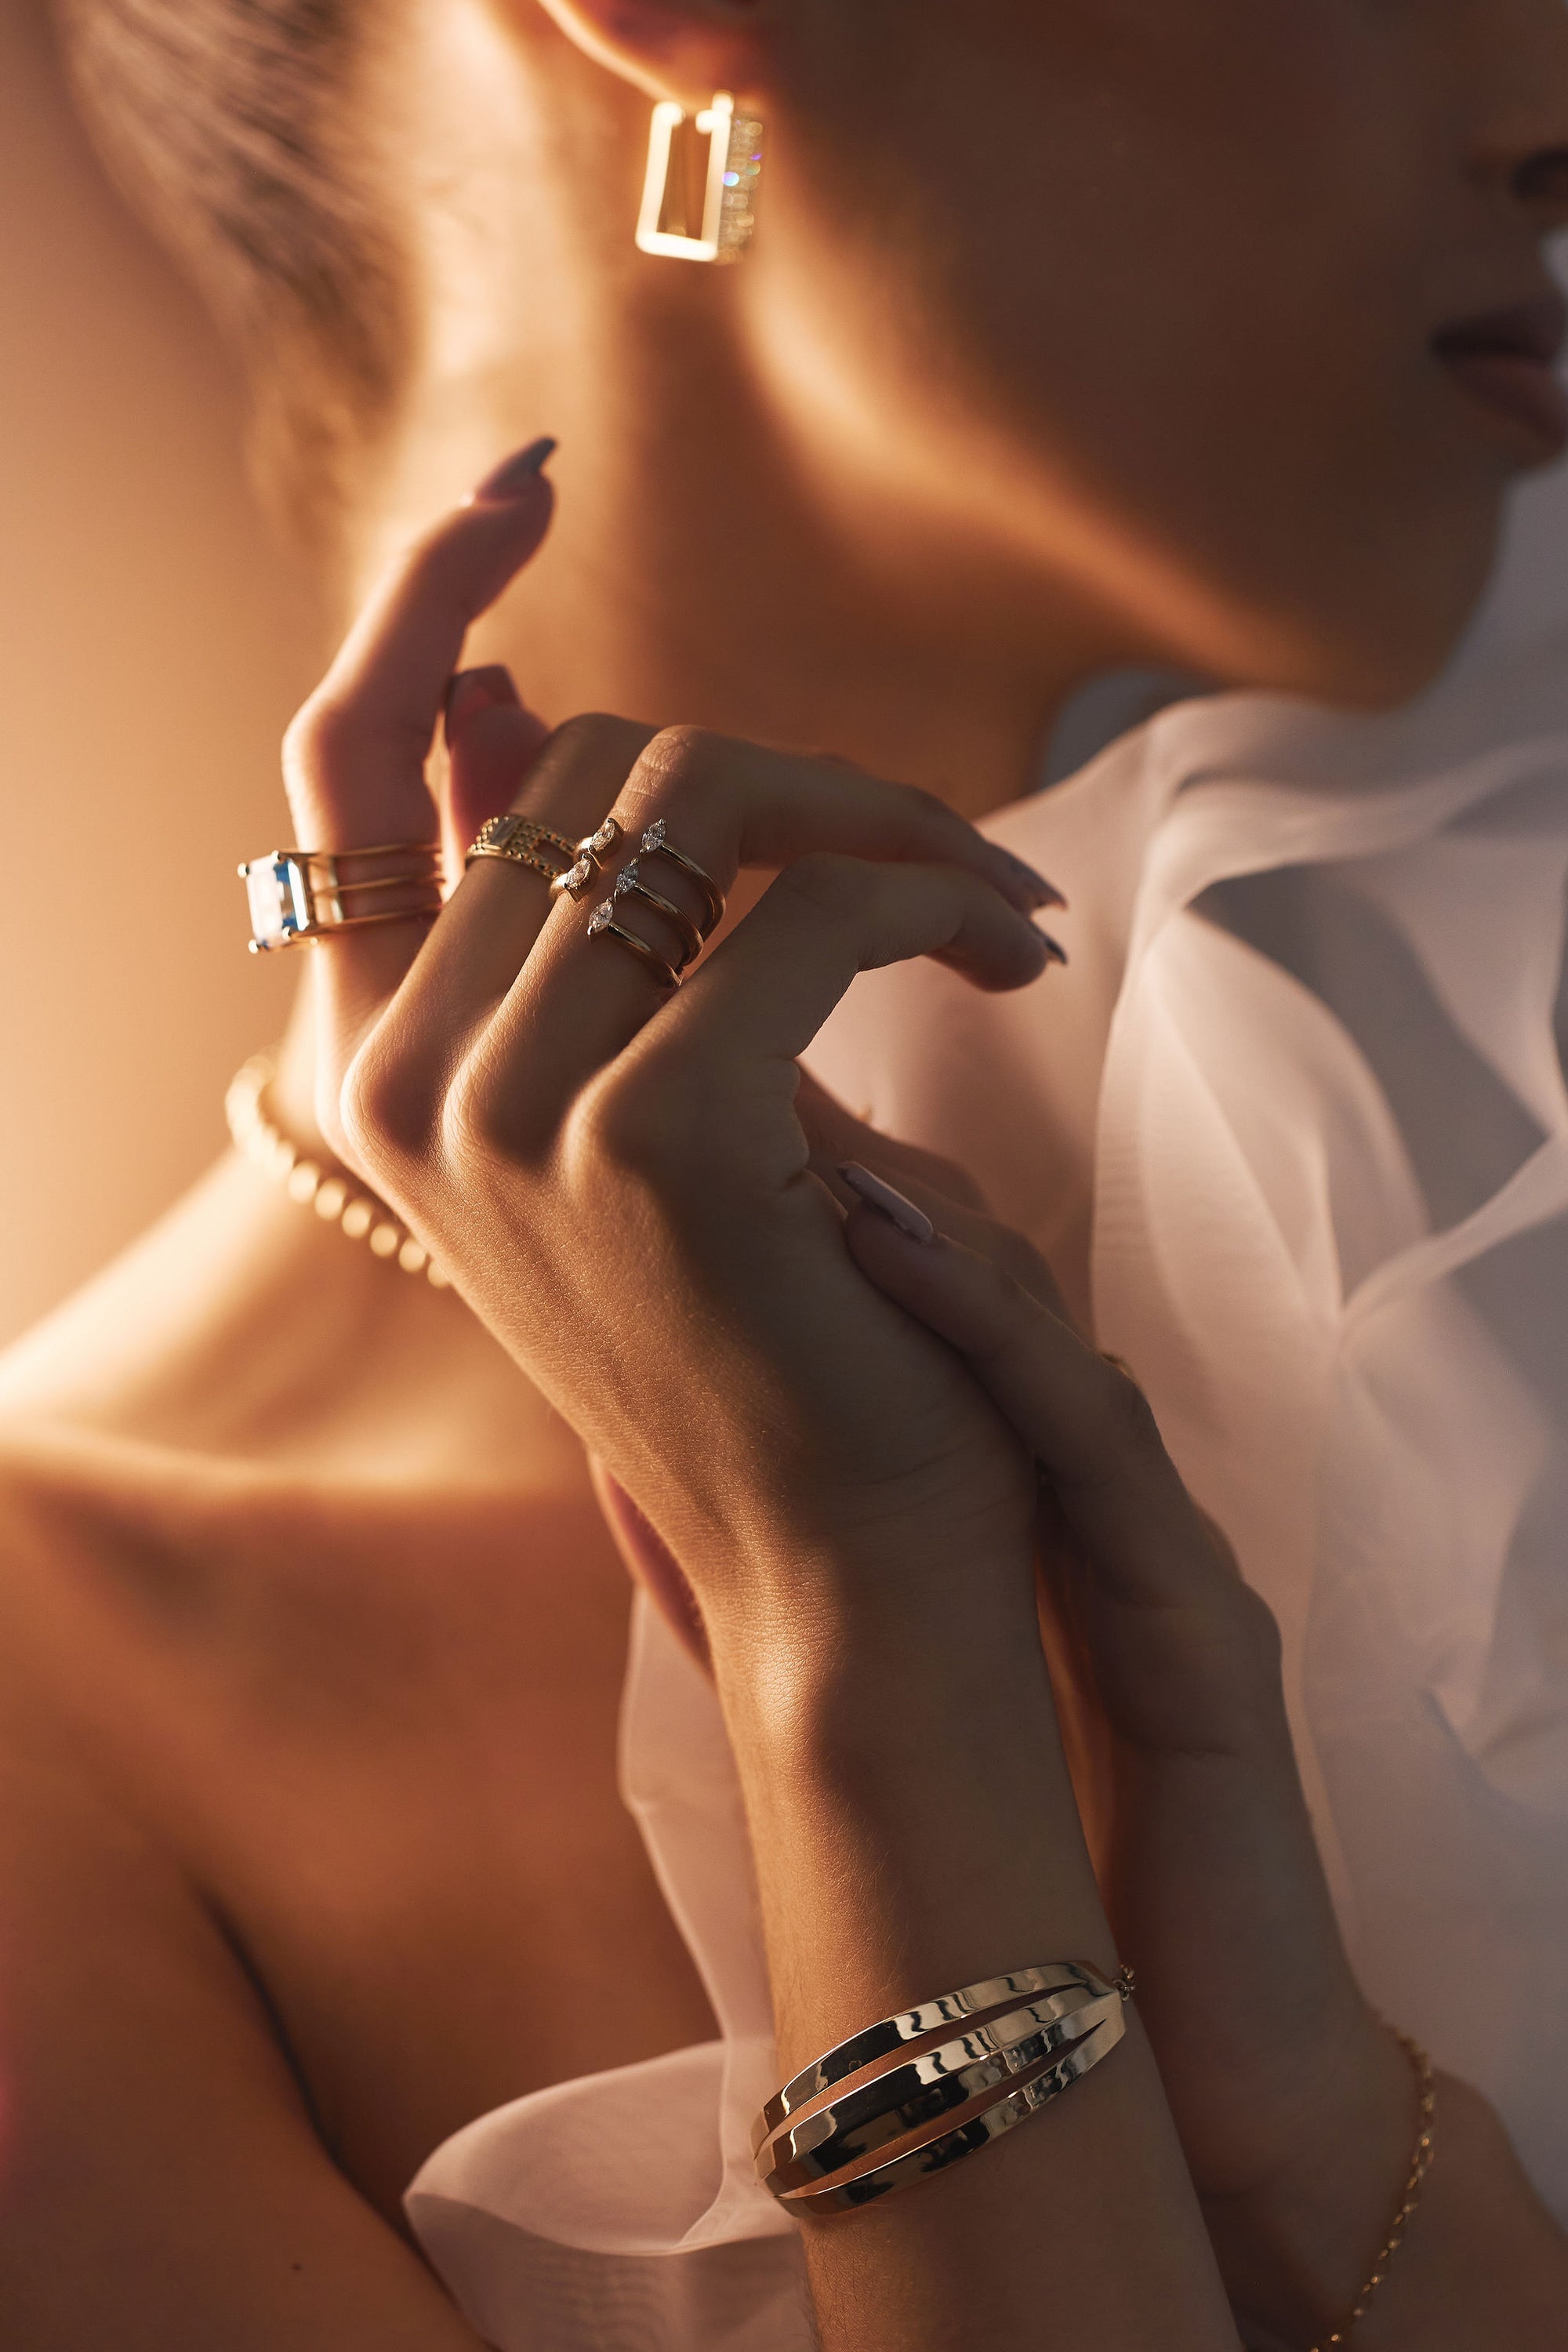 A woman adorned with elegant jewelry, including geometric earrings, multiple rings, a pearl necklace featuring an eye-catching sun charm, and the &quot;Gold Bar - Bar and Chain Yellow Gold Bracelet&quot; from Nijma M Fine Jewelry. She is posed with her hands gracefully touching near her face, wearing a white ruffled garment illuminated by soft, warm light.